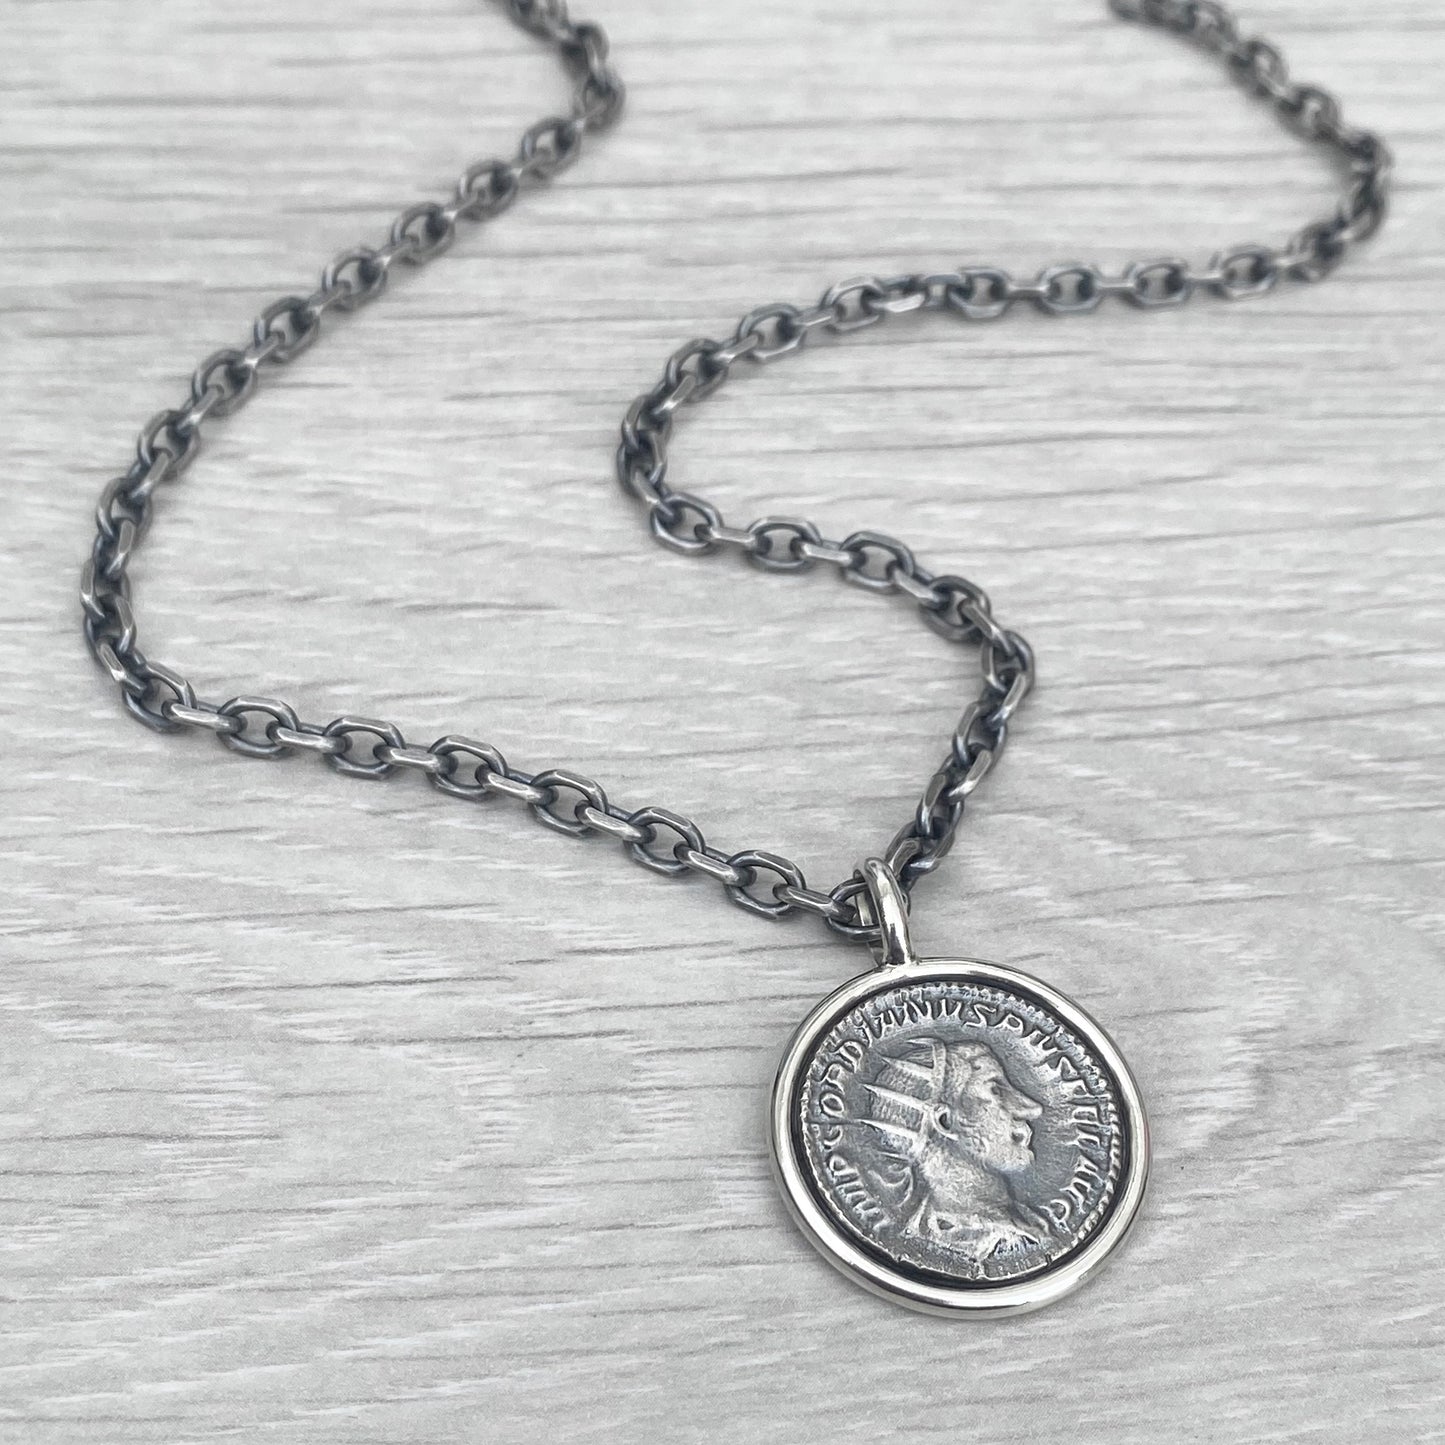 Handmade to order - Oxidised solid Sterling silver 23mm replica Roman coin circle framed pendant on a choice of trace or round box chain